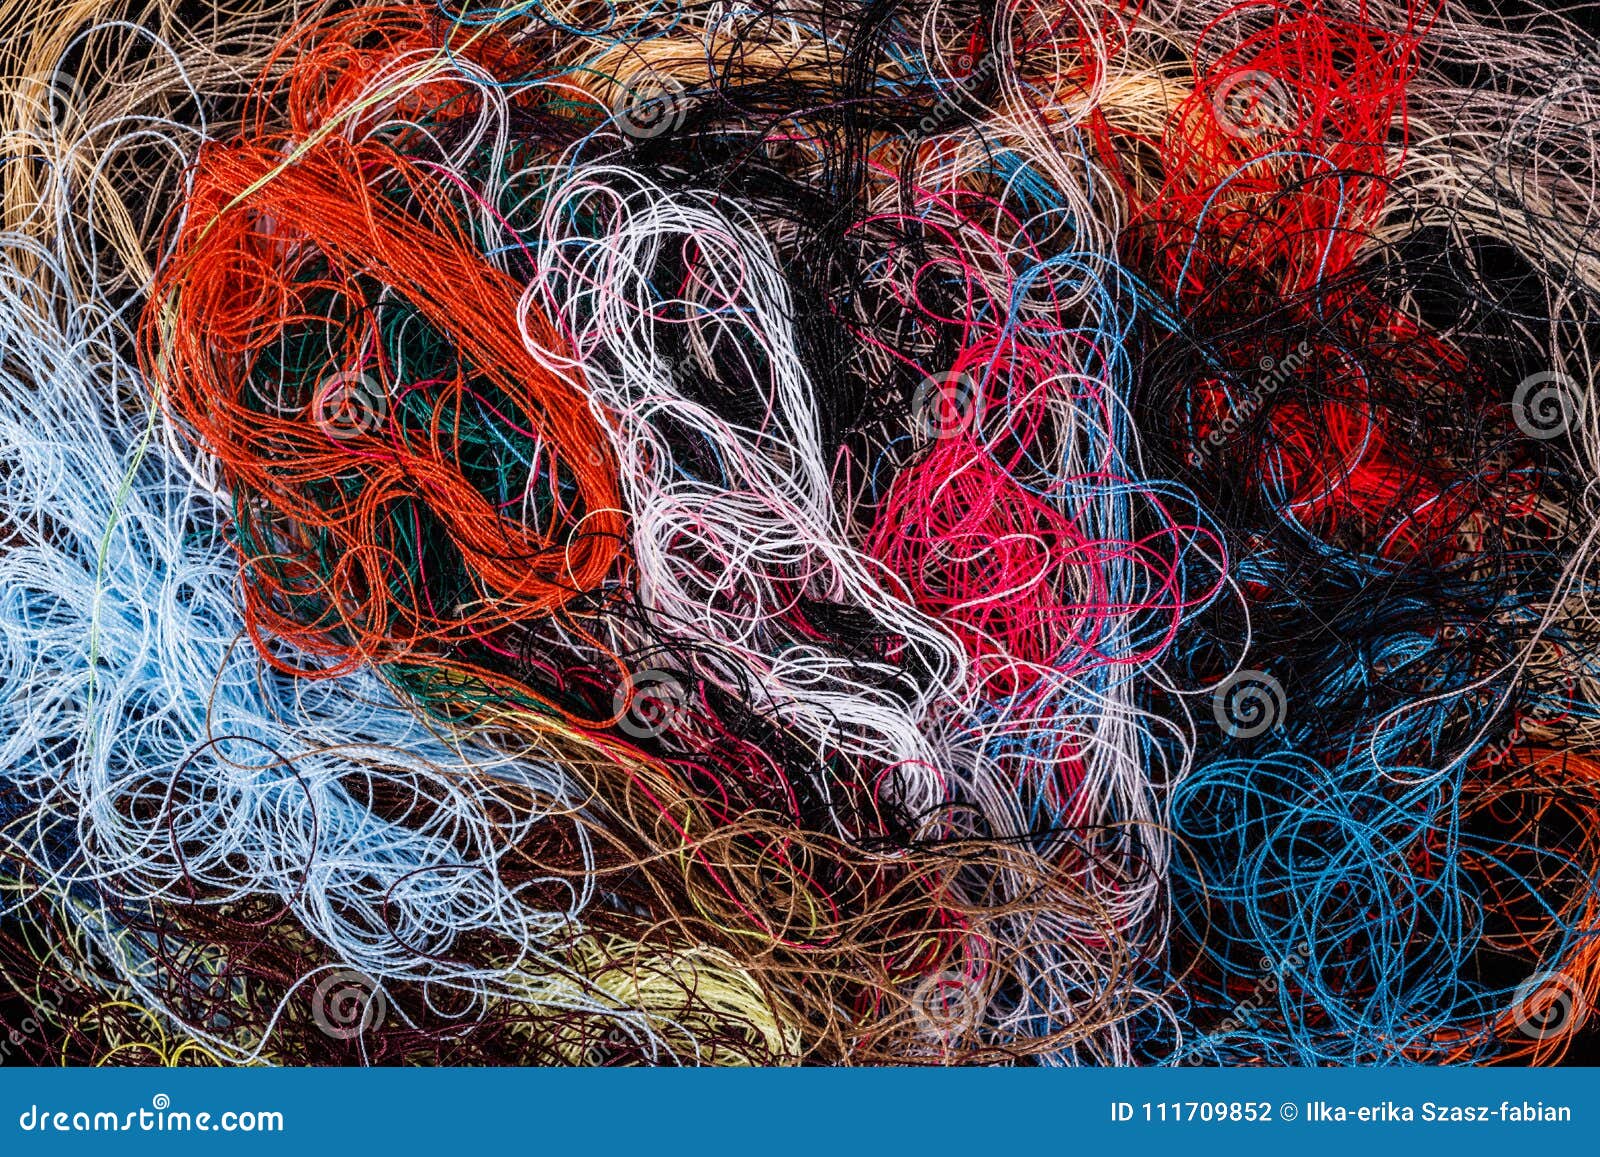 Tangled Colorful Sewing Threads Background Stock Photo - Image of ...